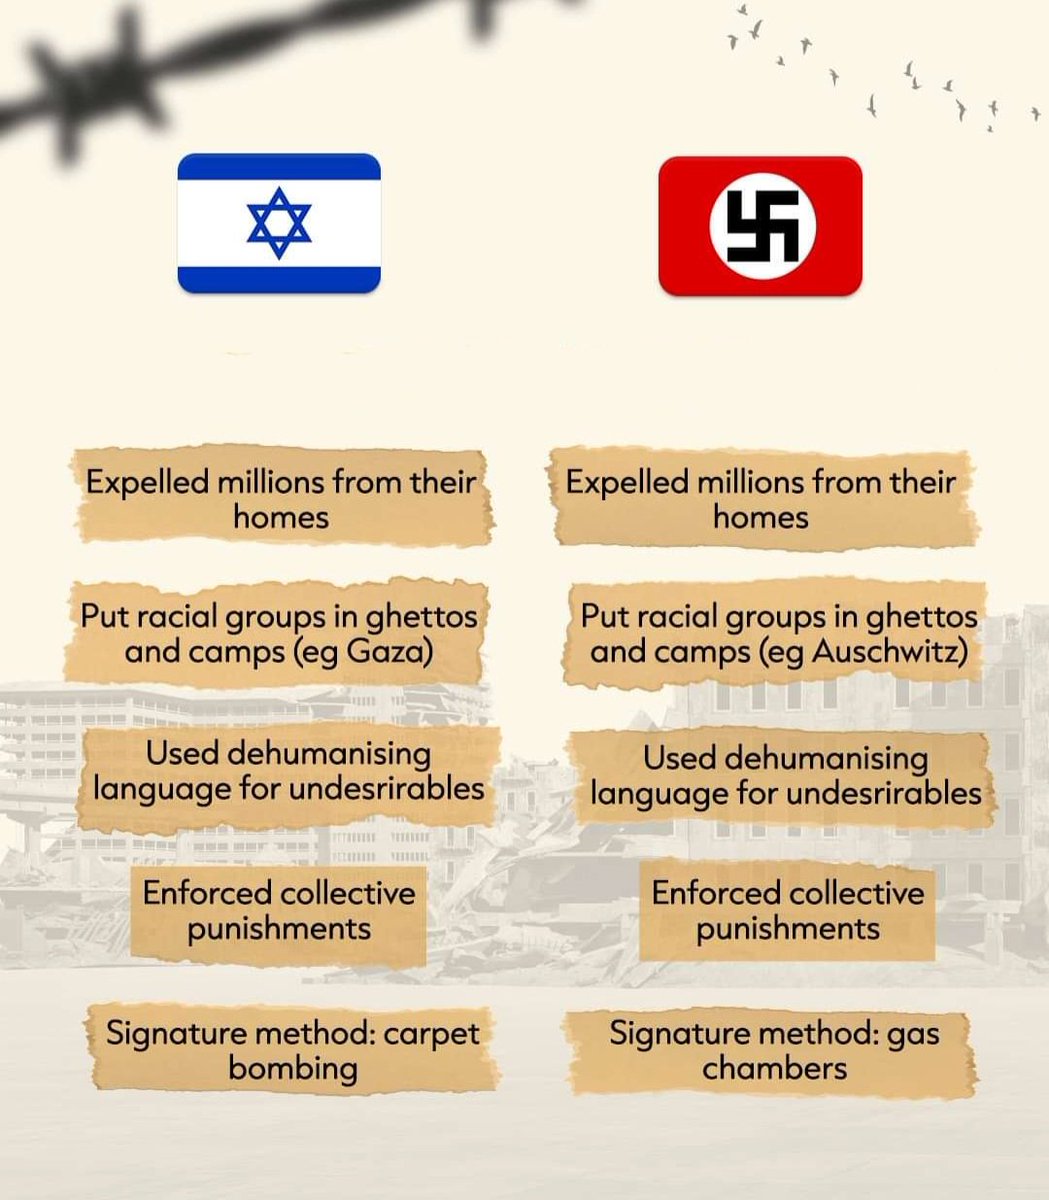 Can you spot the difference? Nazi copy = Israel The Irony of becoming what you once hated.